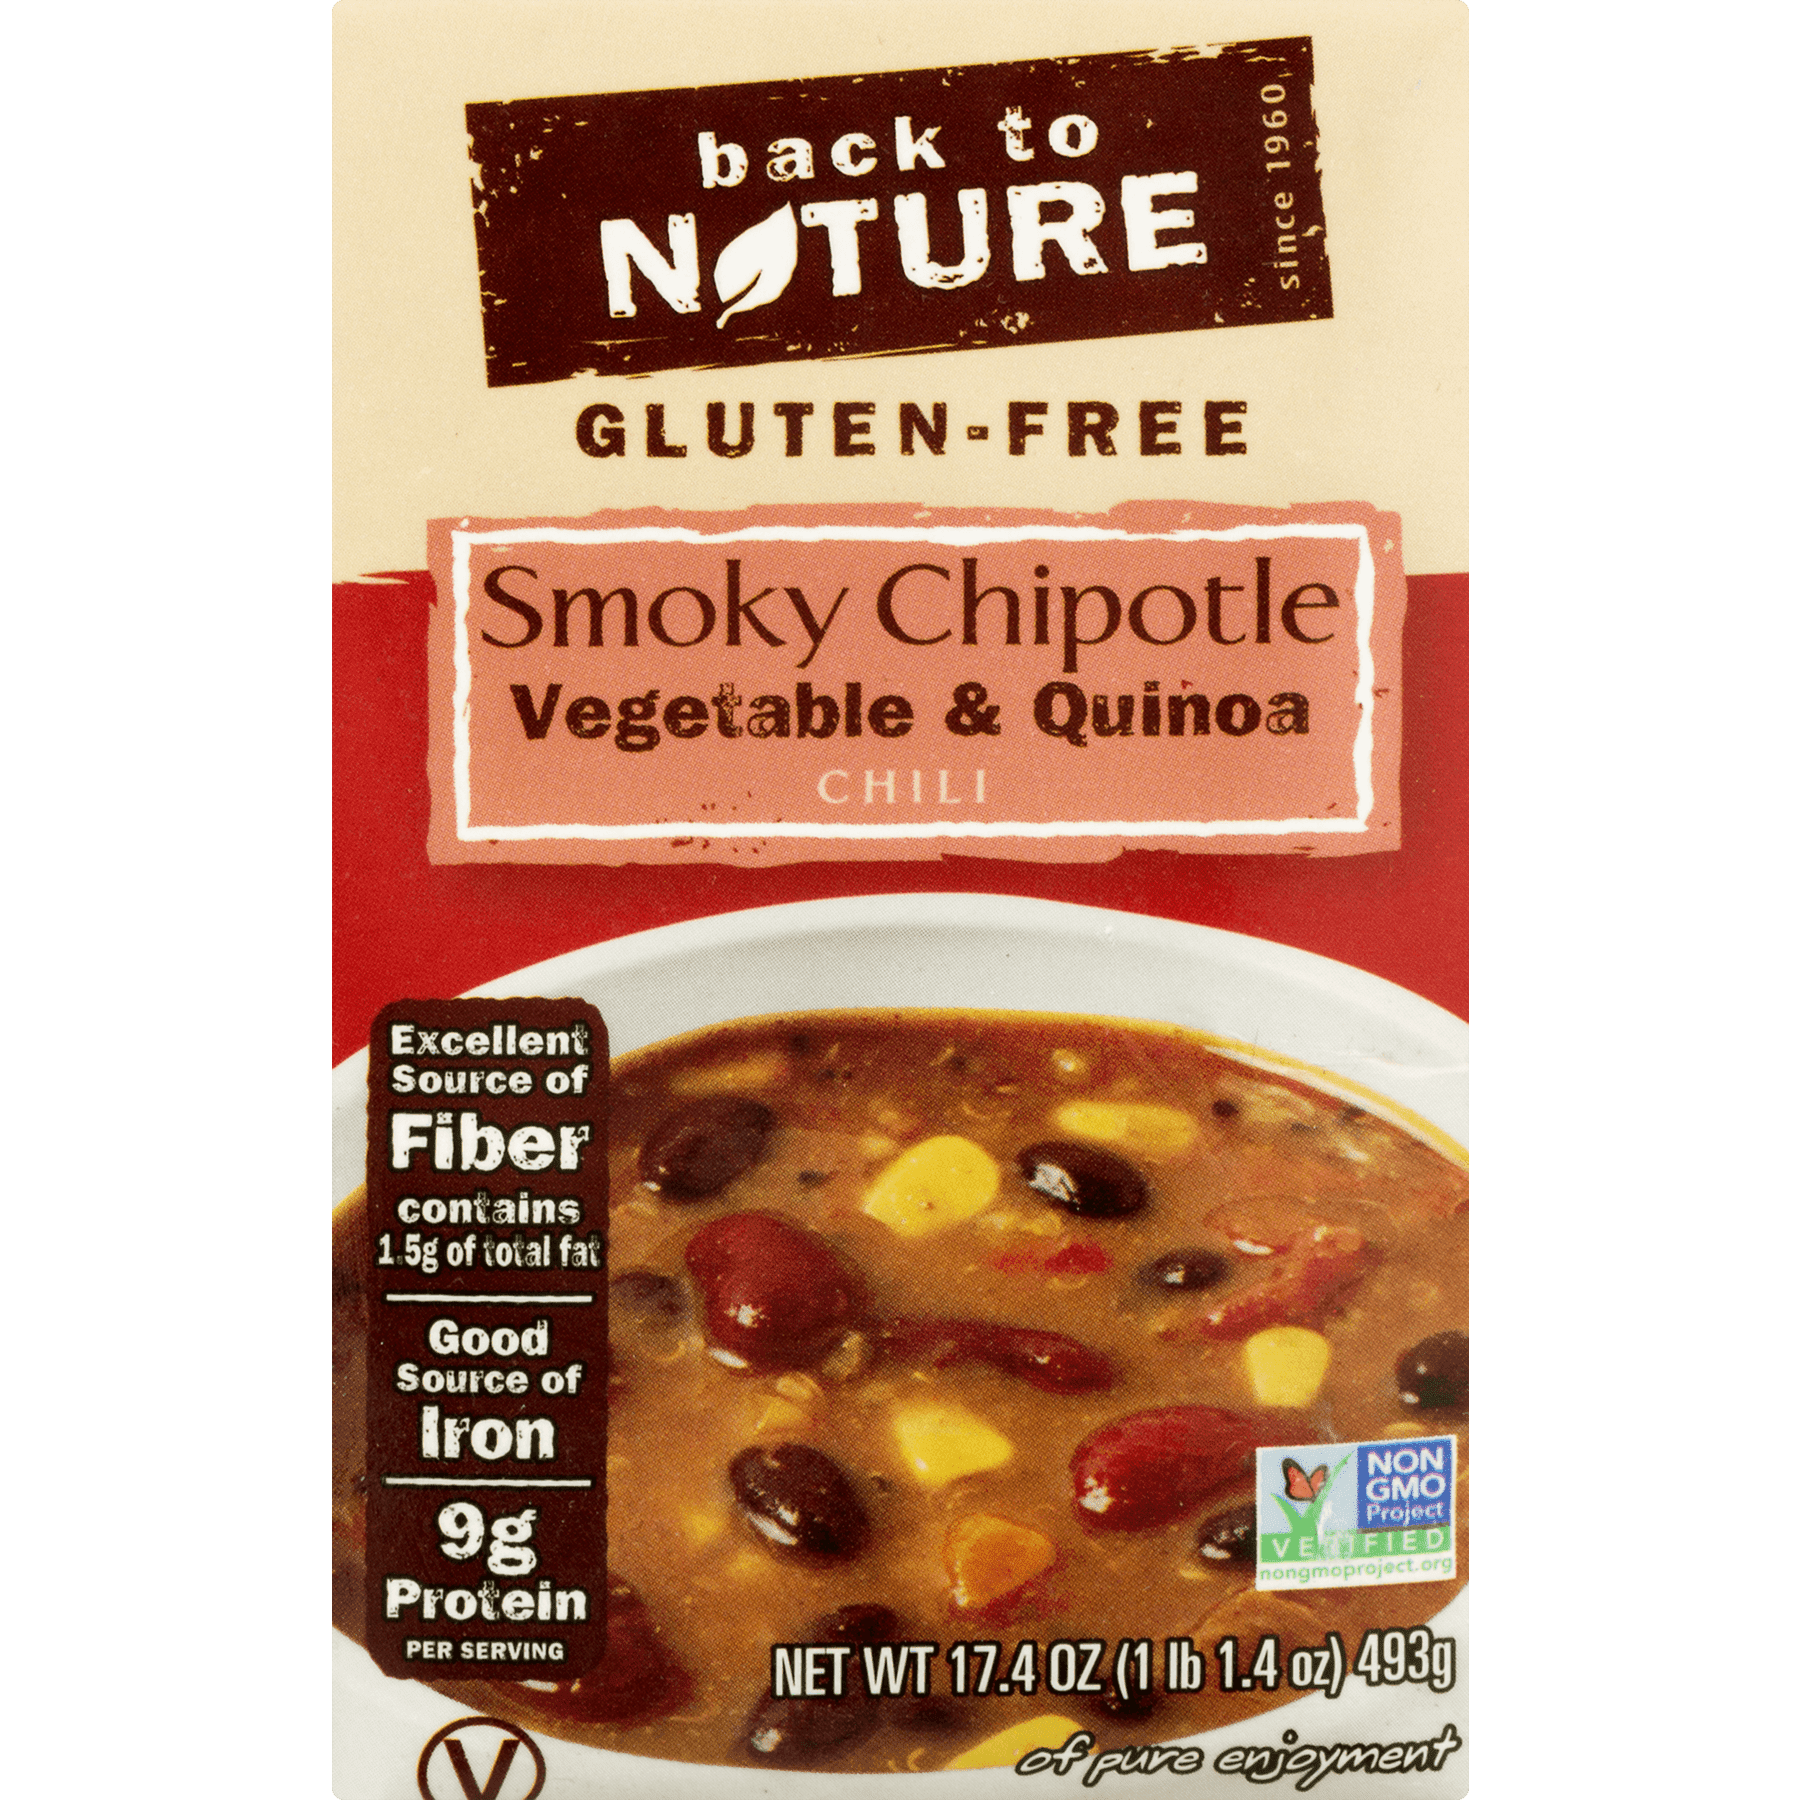 6 Pack Back To Nature Bluten Free Chili Smoky Chipotle Vegetable Quinos 17 4 Oz Walmart Com